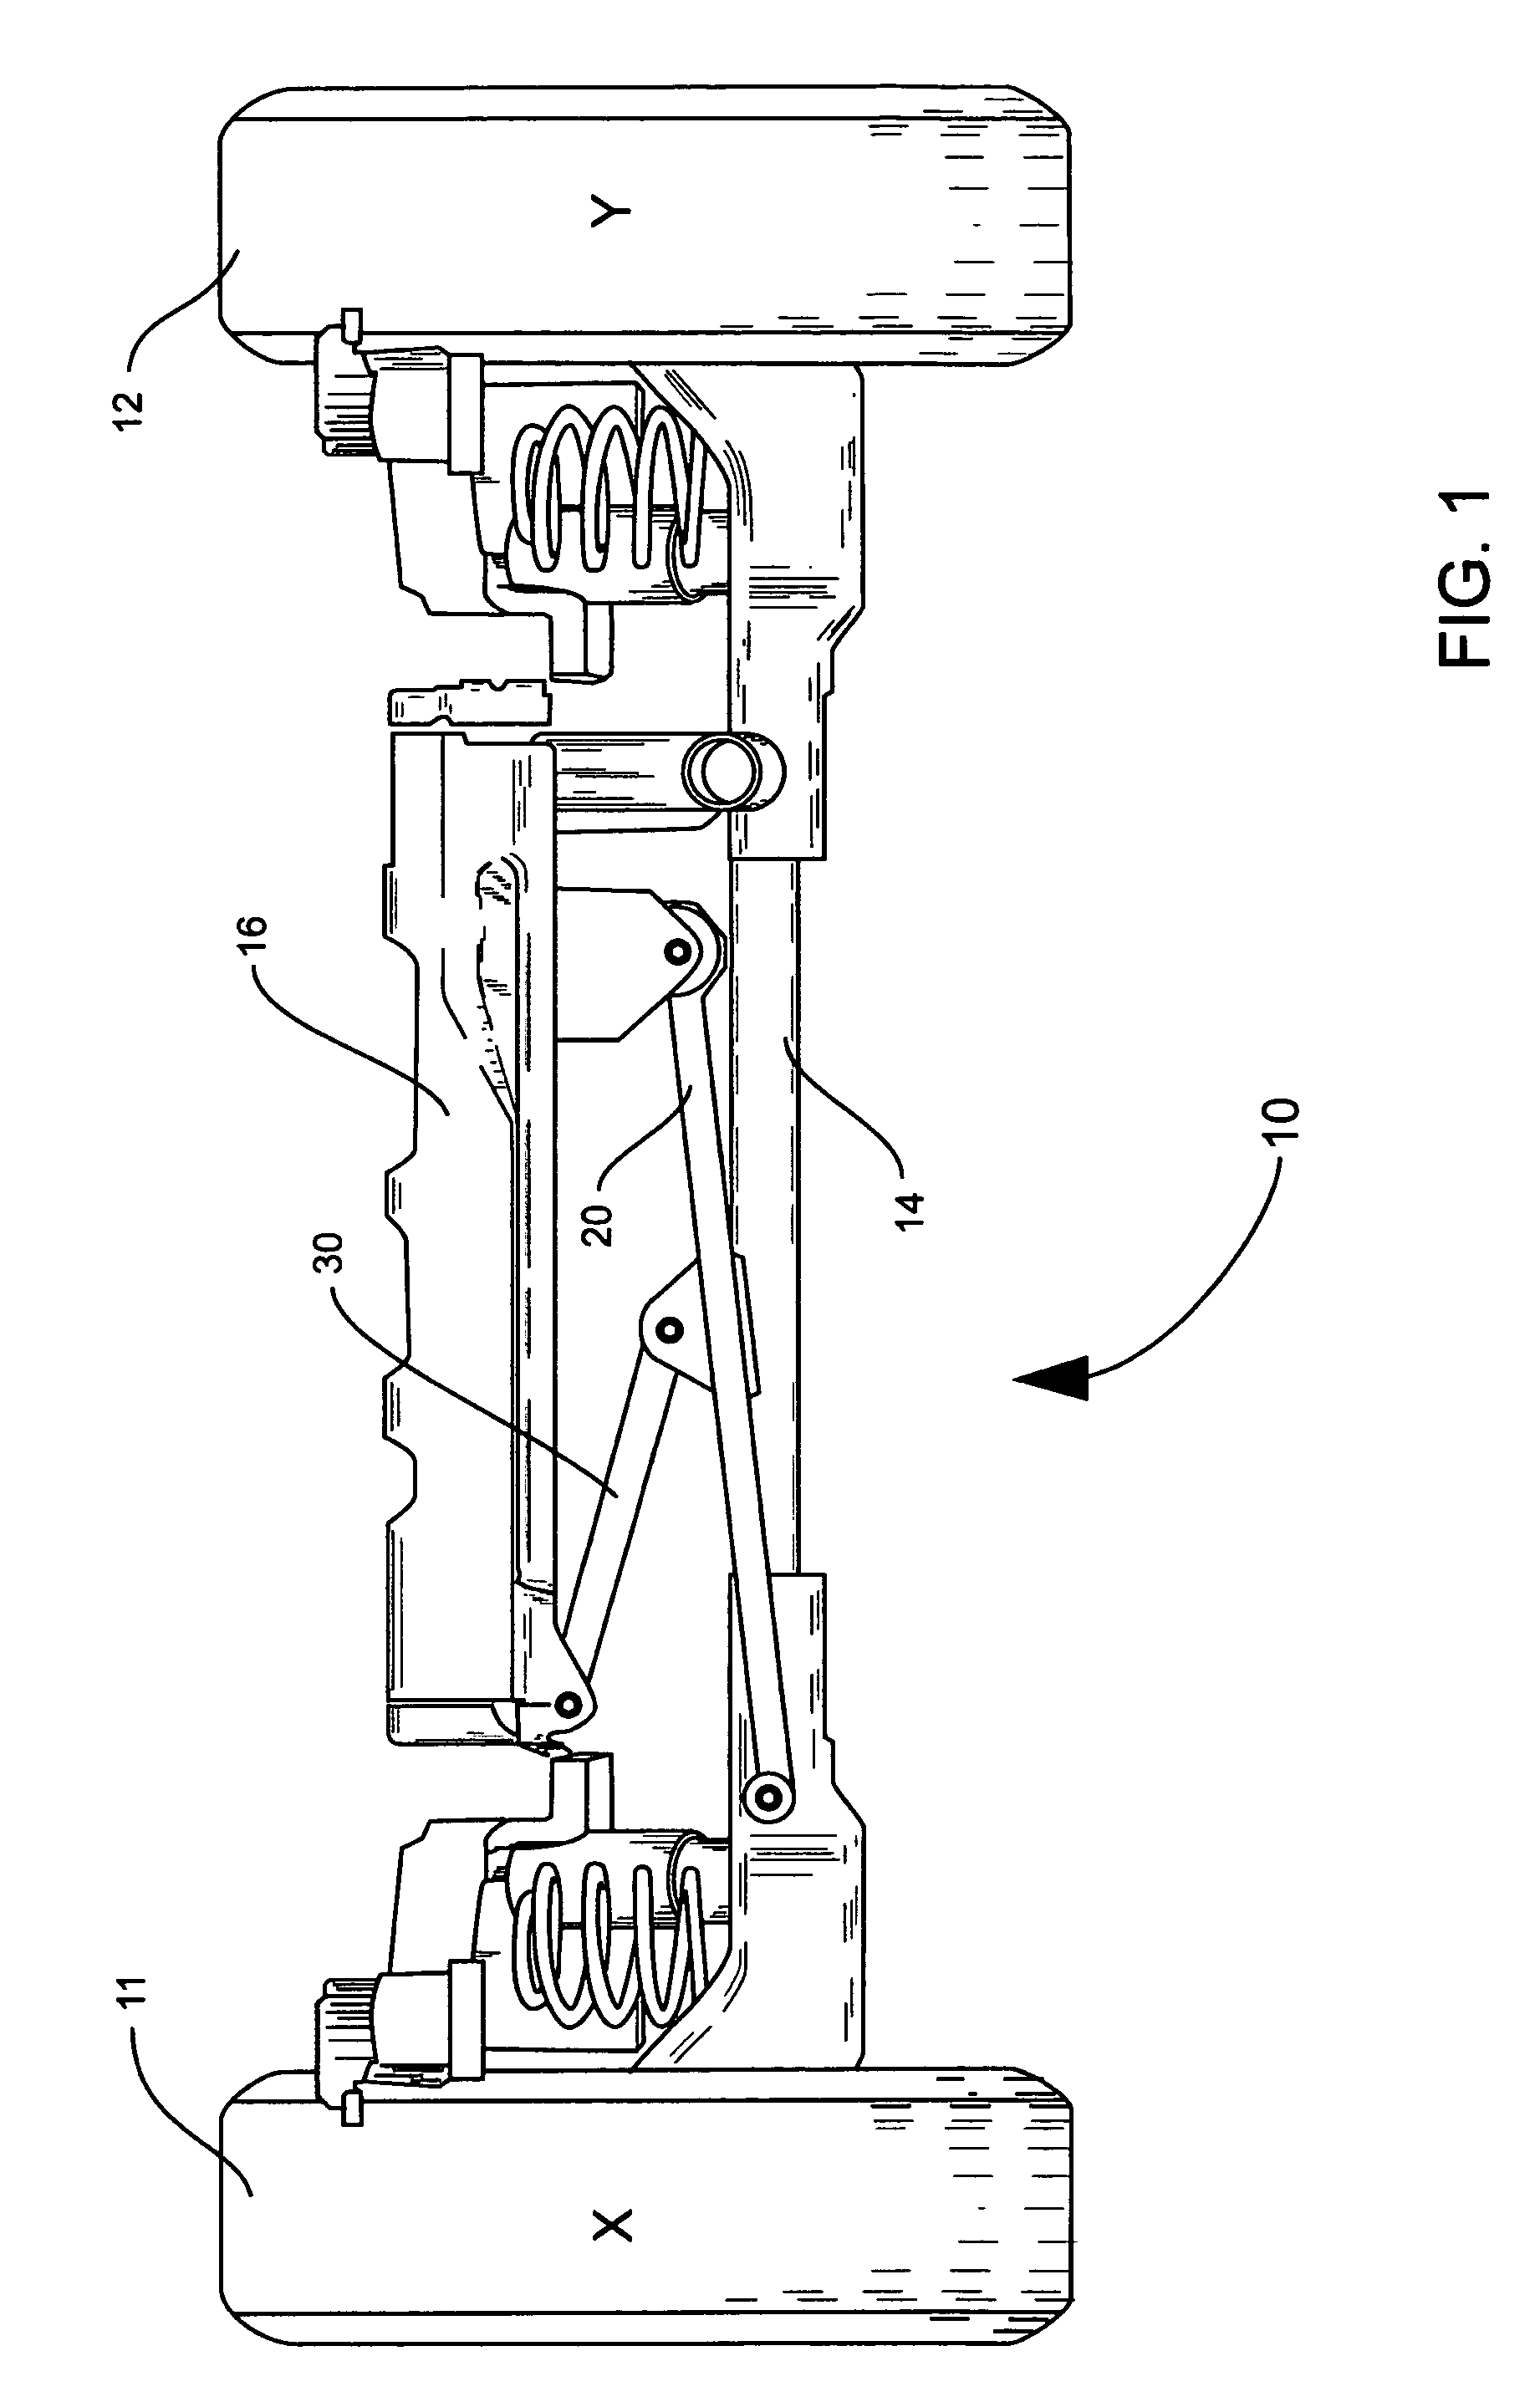 Lateral control mechanism for an axle beam suspension system